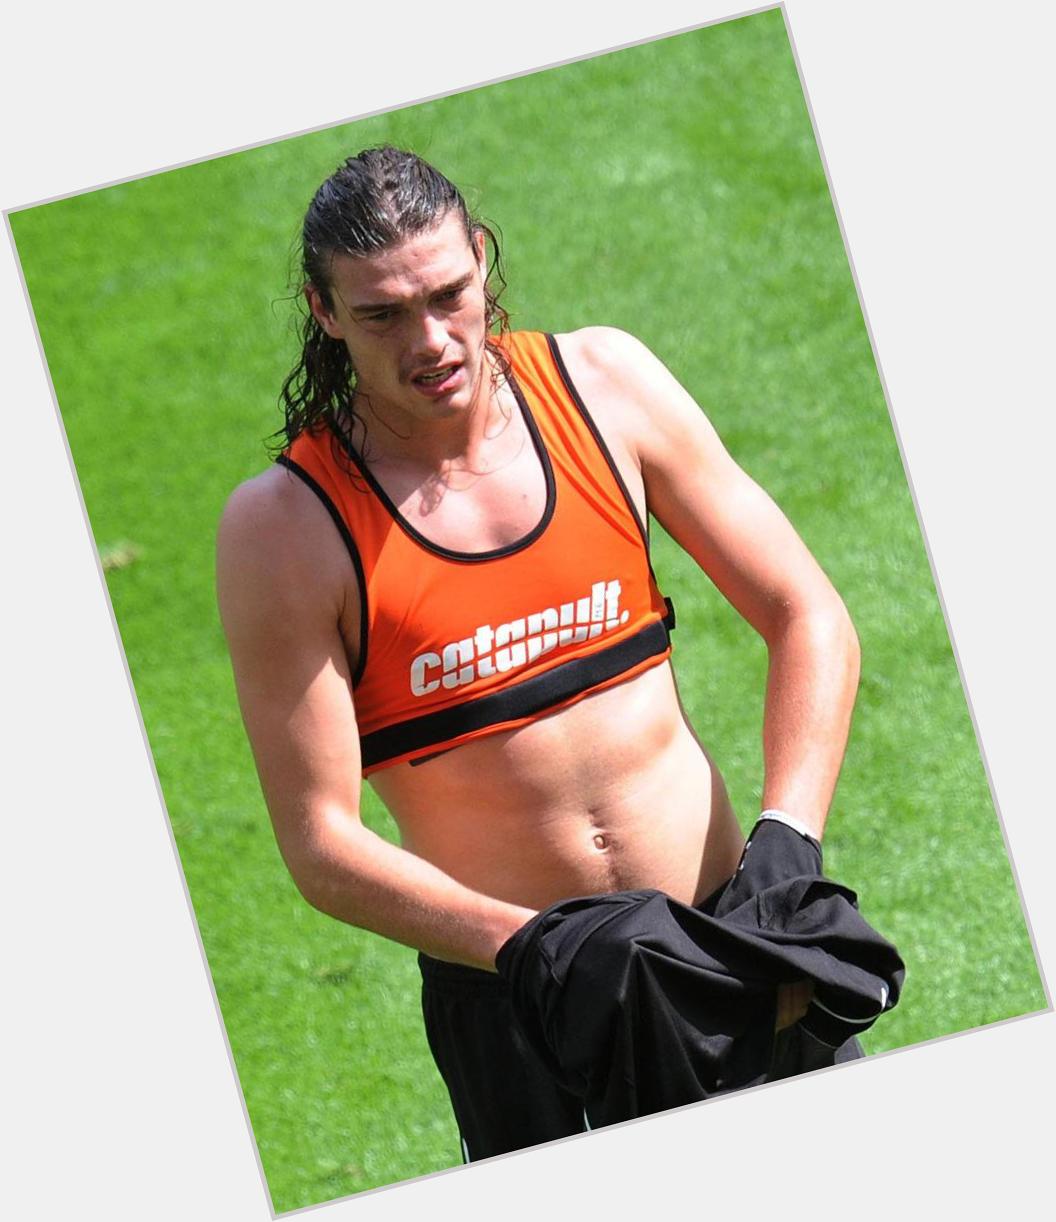 Happy Birthday Andy Carroll. One of the most laughable football players of the 21st century 